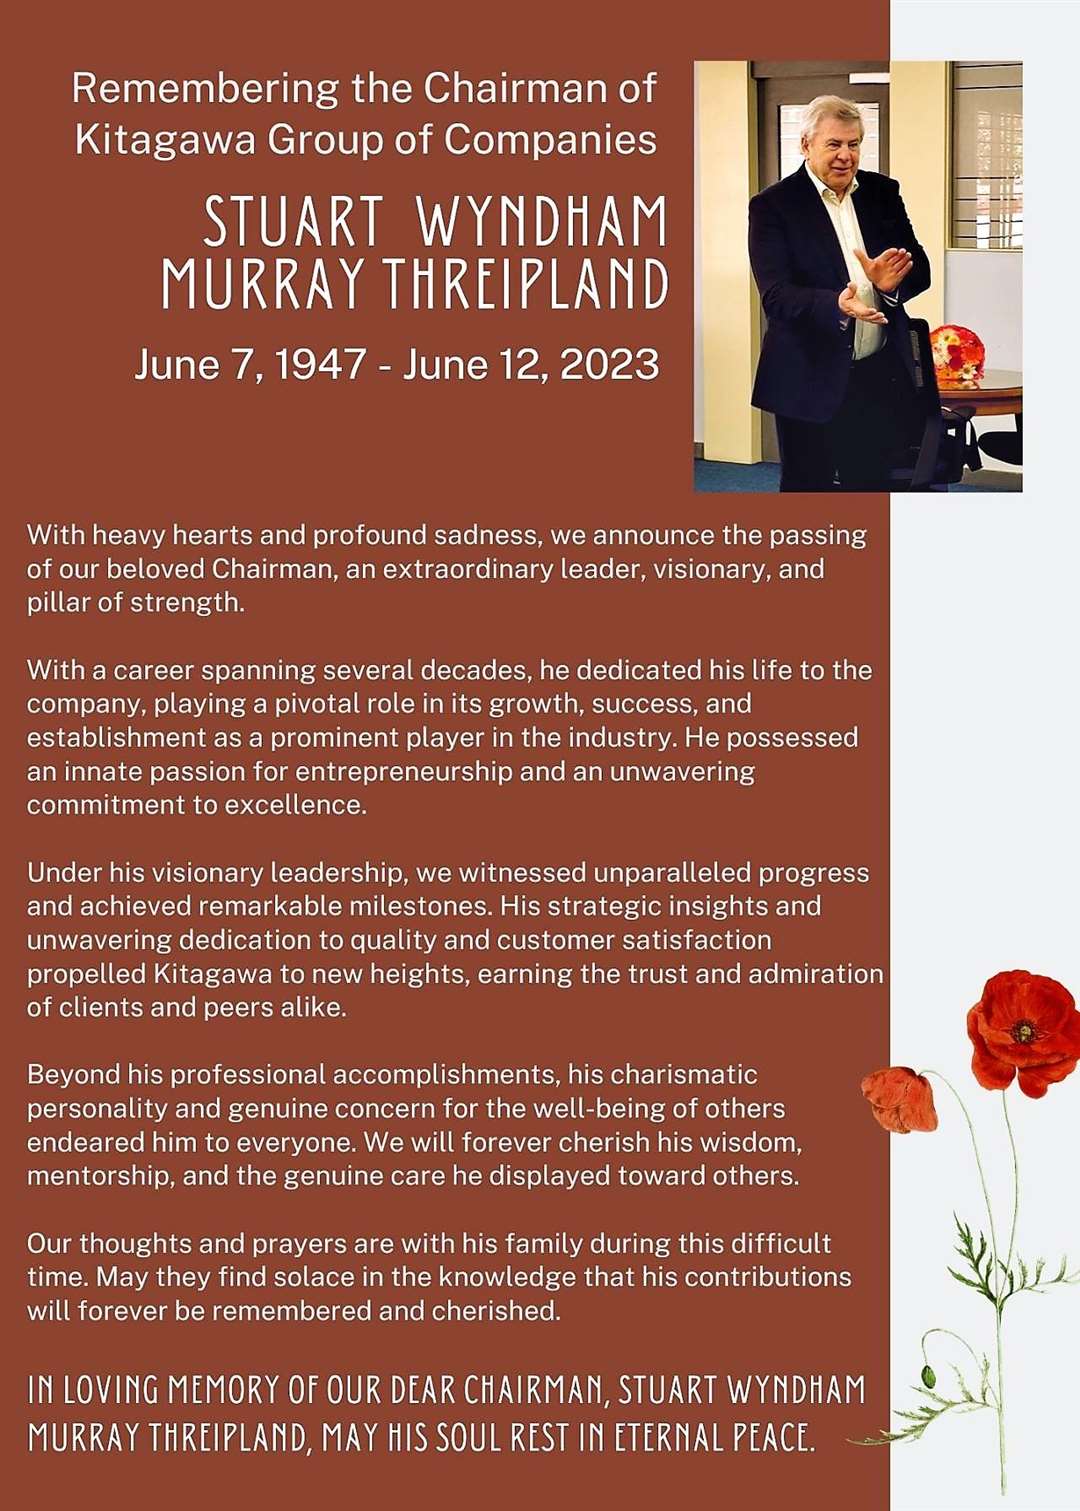 Tribute posted by the Kitagawa group of companies which Mr Murray Threipland chaired.